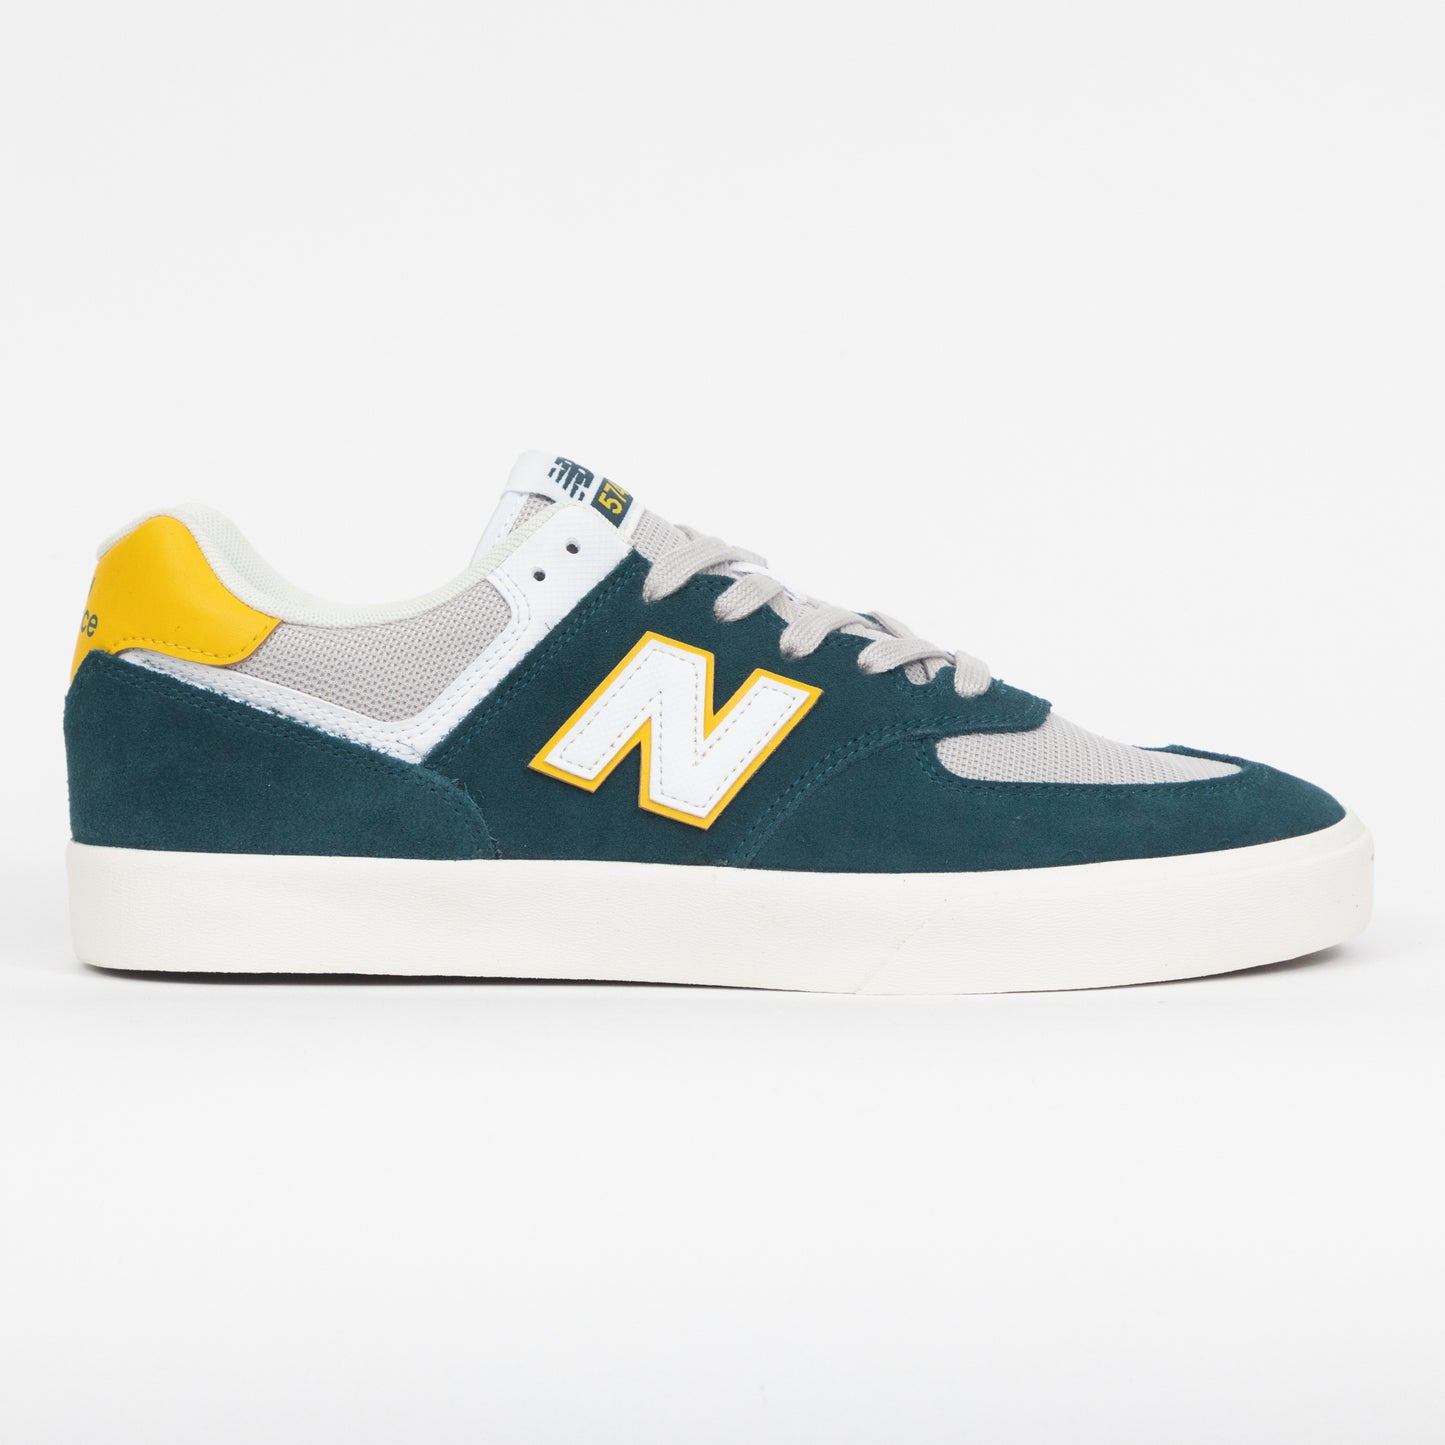 NEW BALANCE Numeric 574 Vulc Trainers in TEAL & WHITE